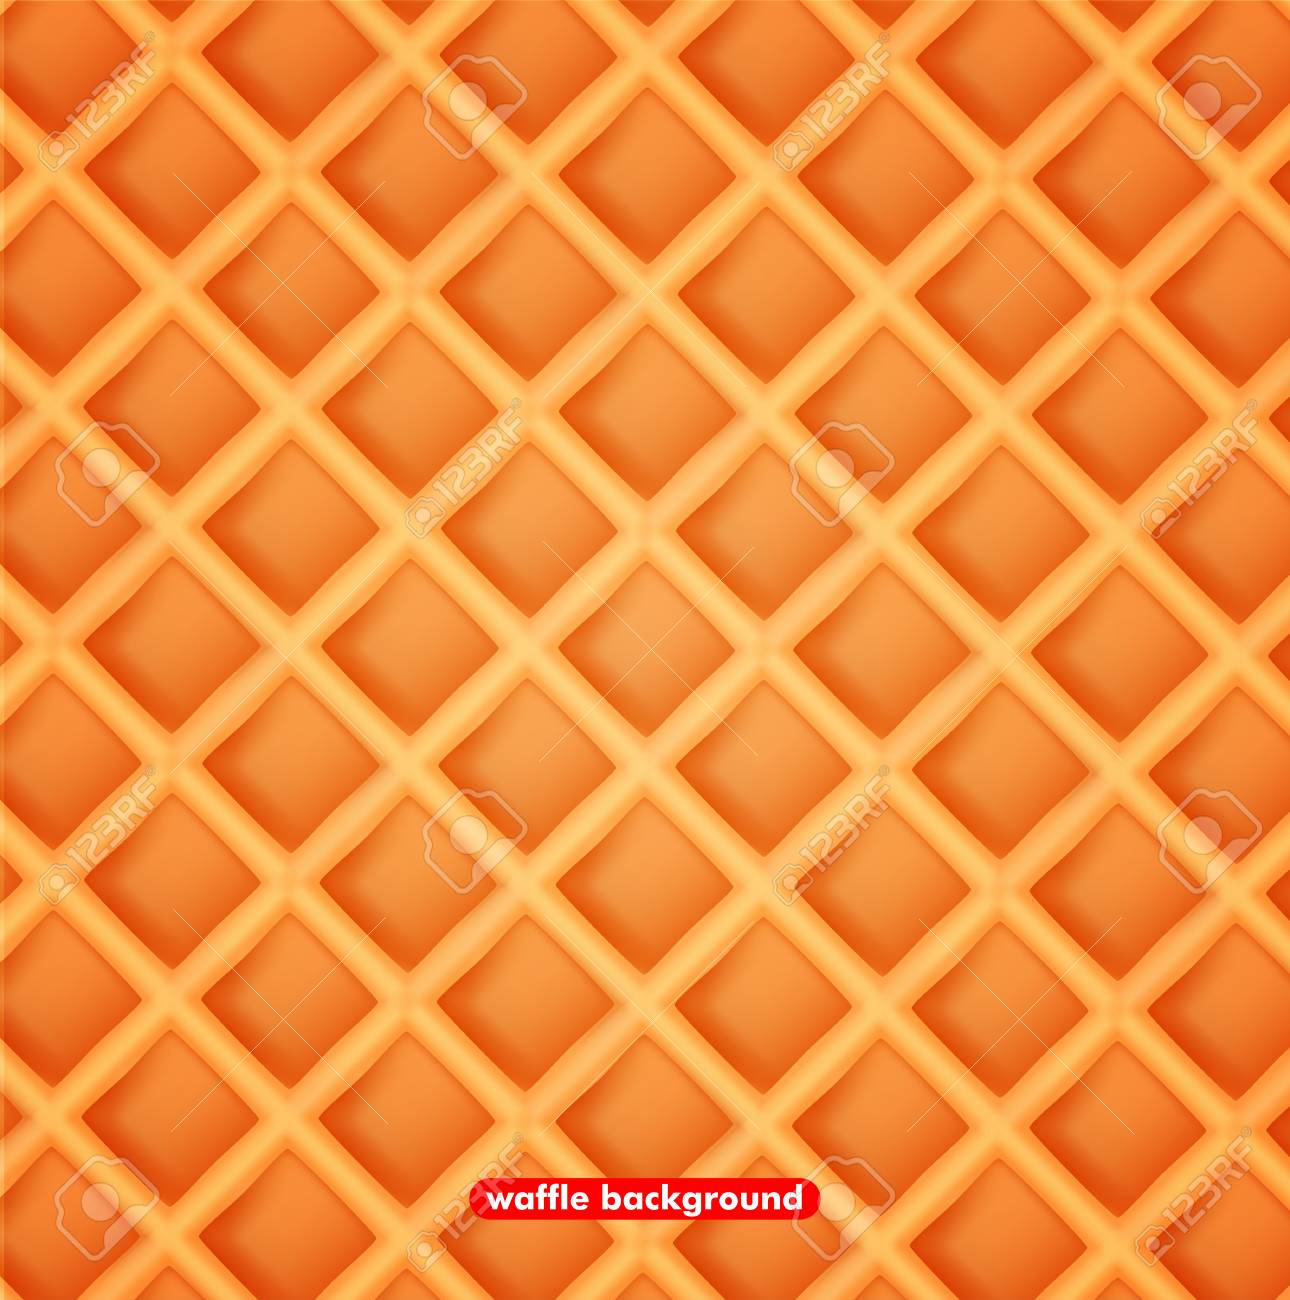 Vector Illustration Sweet Waffle Background The Texture Wafer